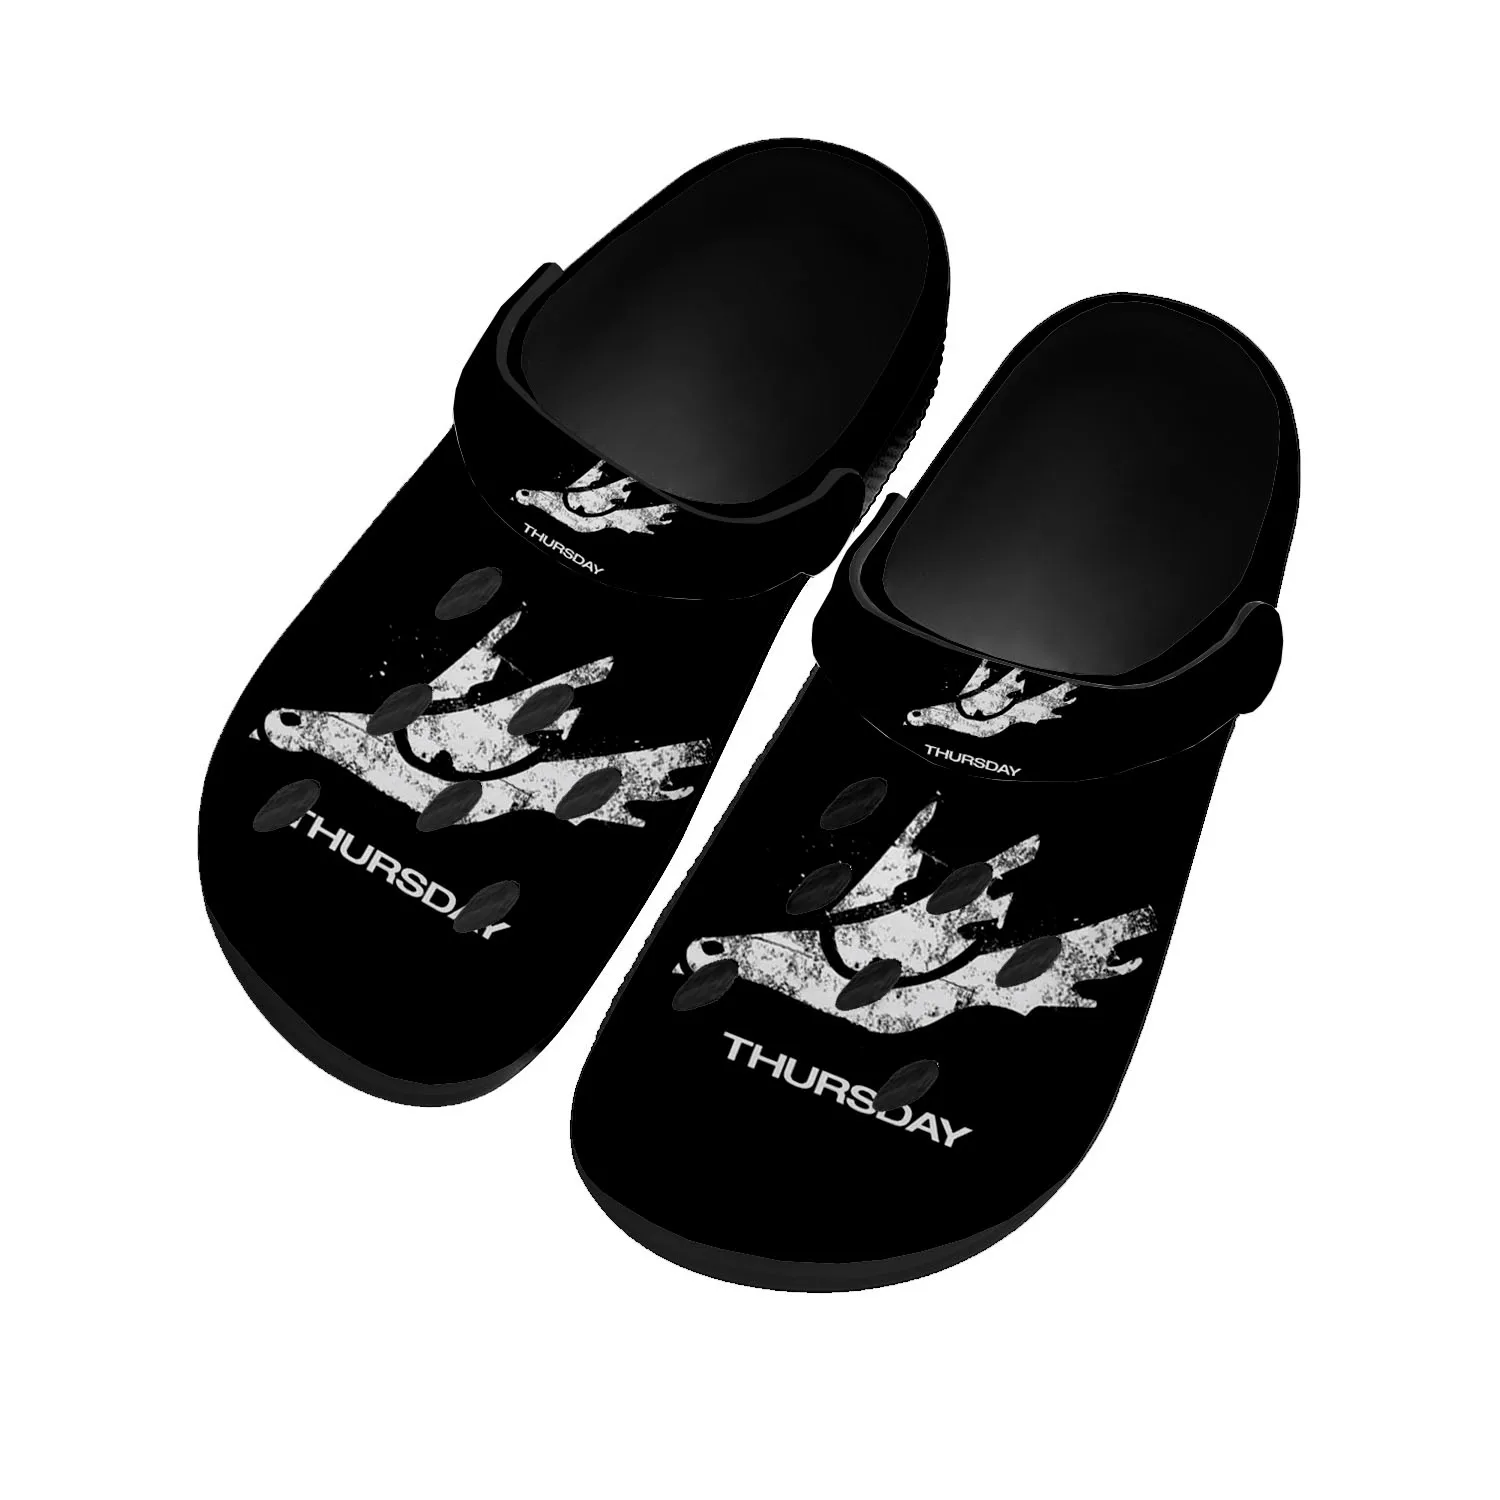 

Thursday Band Home Clog Mens Women Teenager Sandals Shoes Garden Bespoke Customized Breathable Shoe Beach Hole Slippers Black